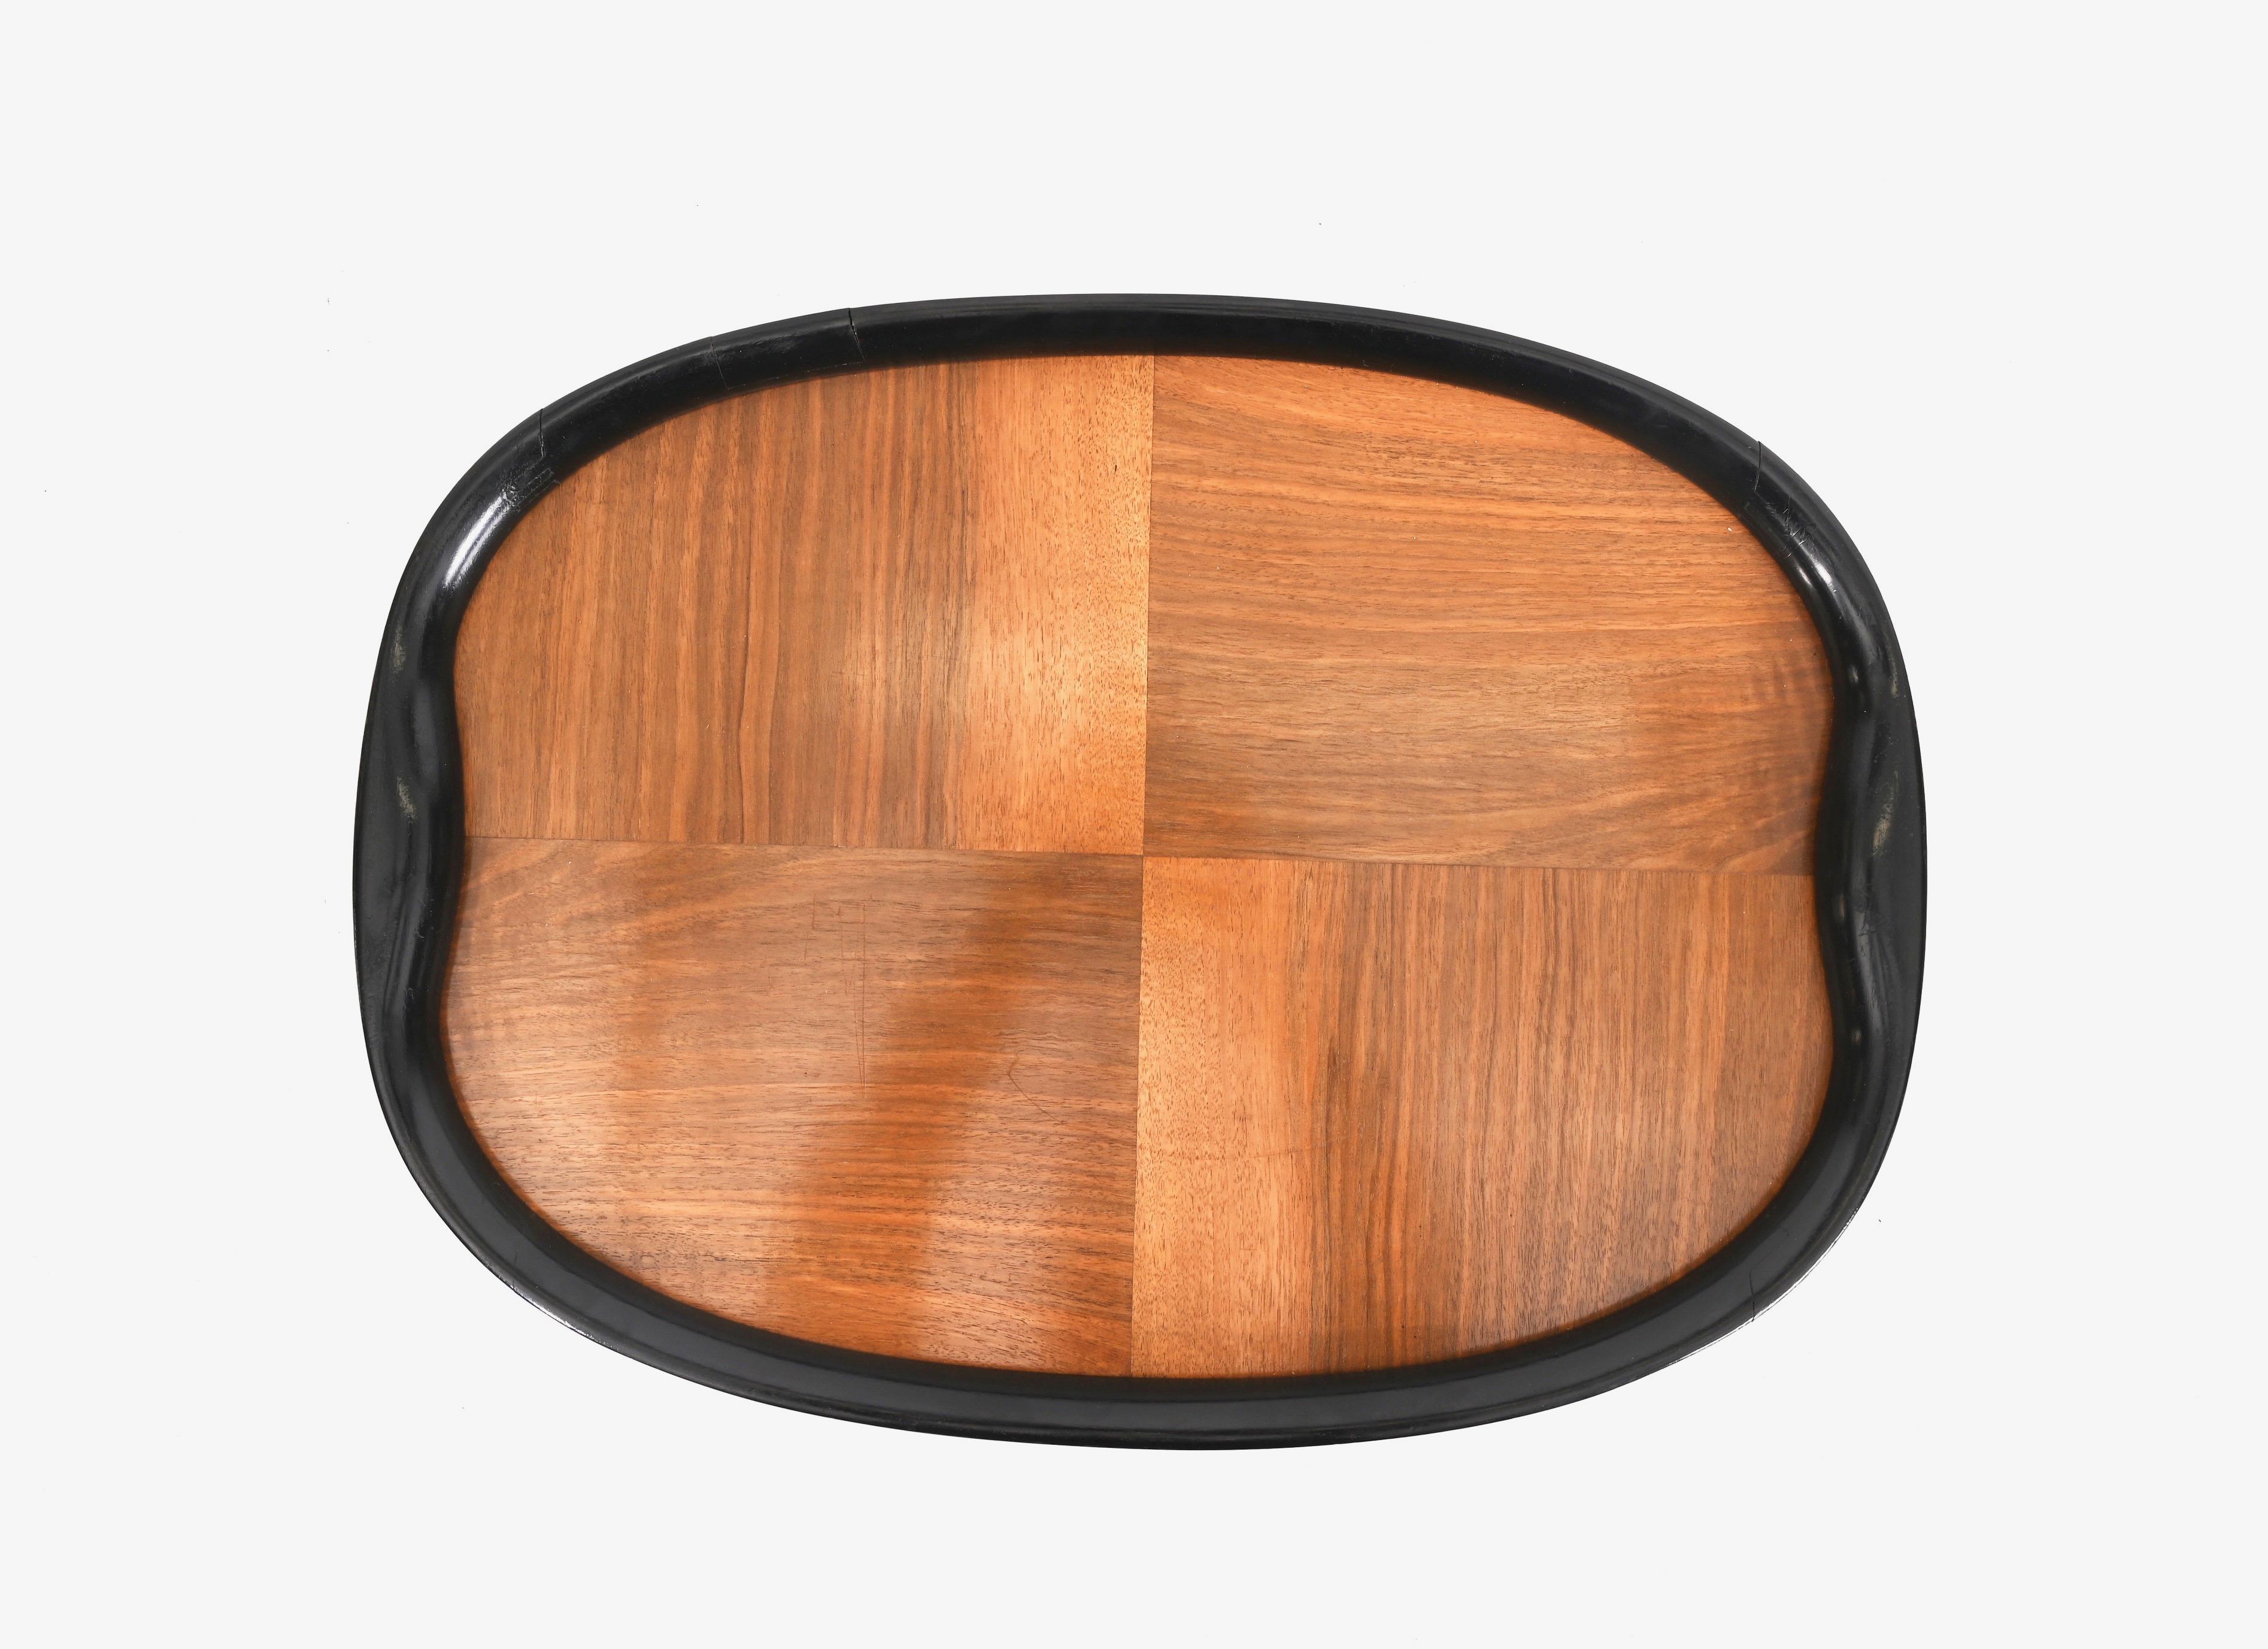 Pair of Art Deco Serving Trays, Ebonized Wood and Walnut, Italy, 1940s For Sale 11